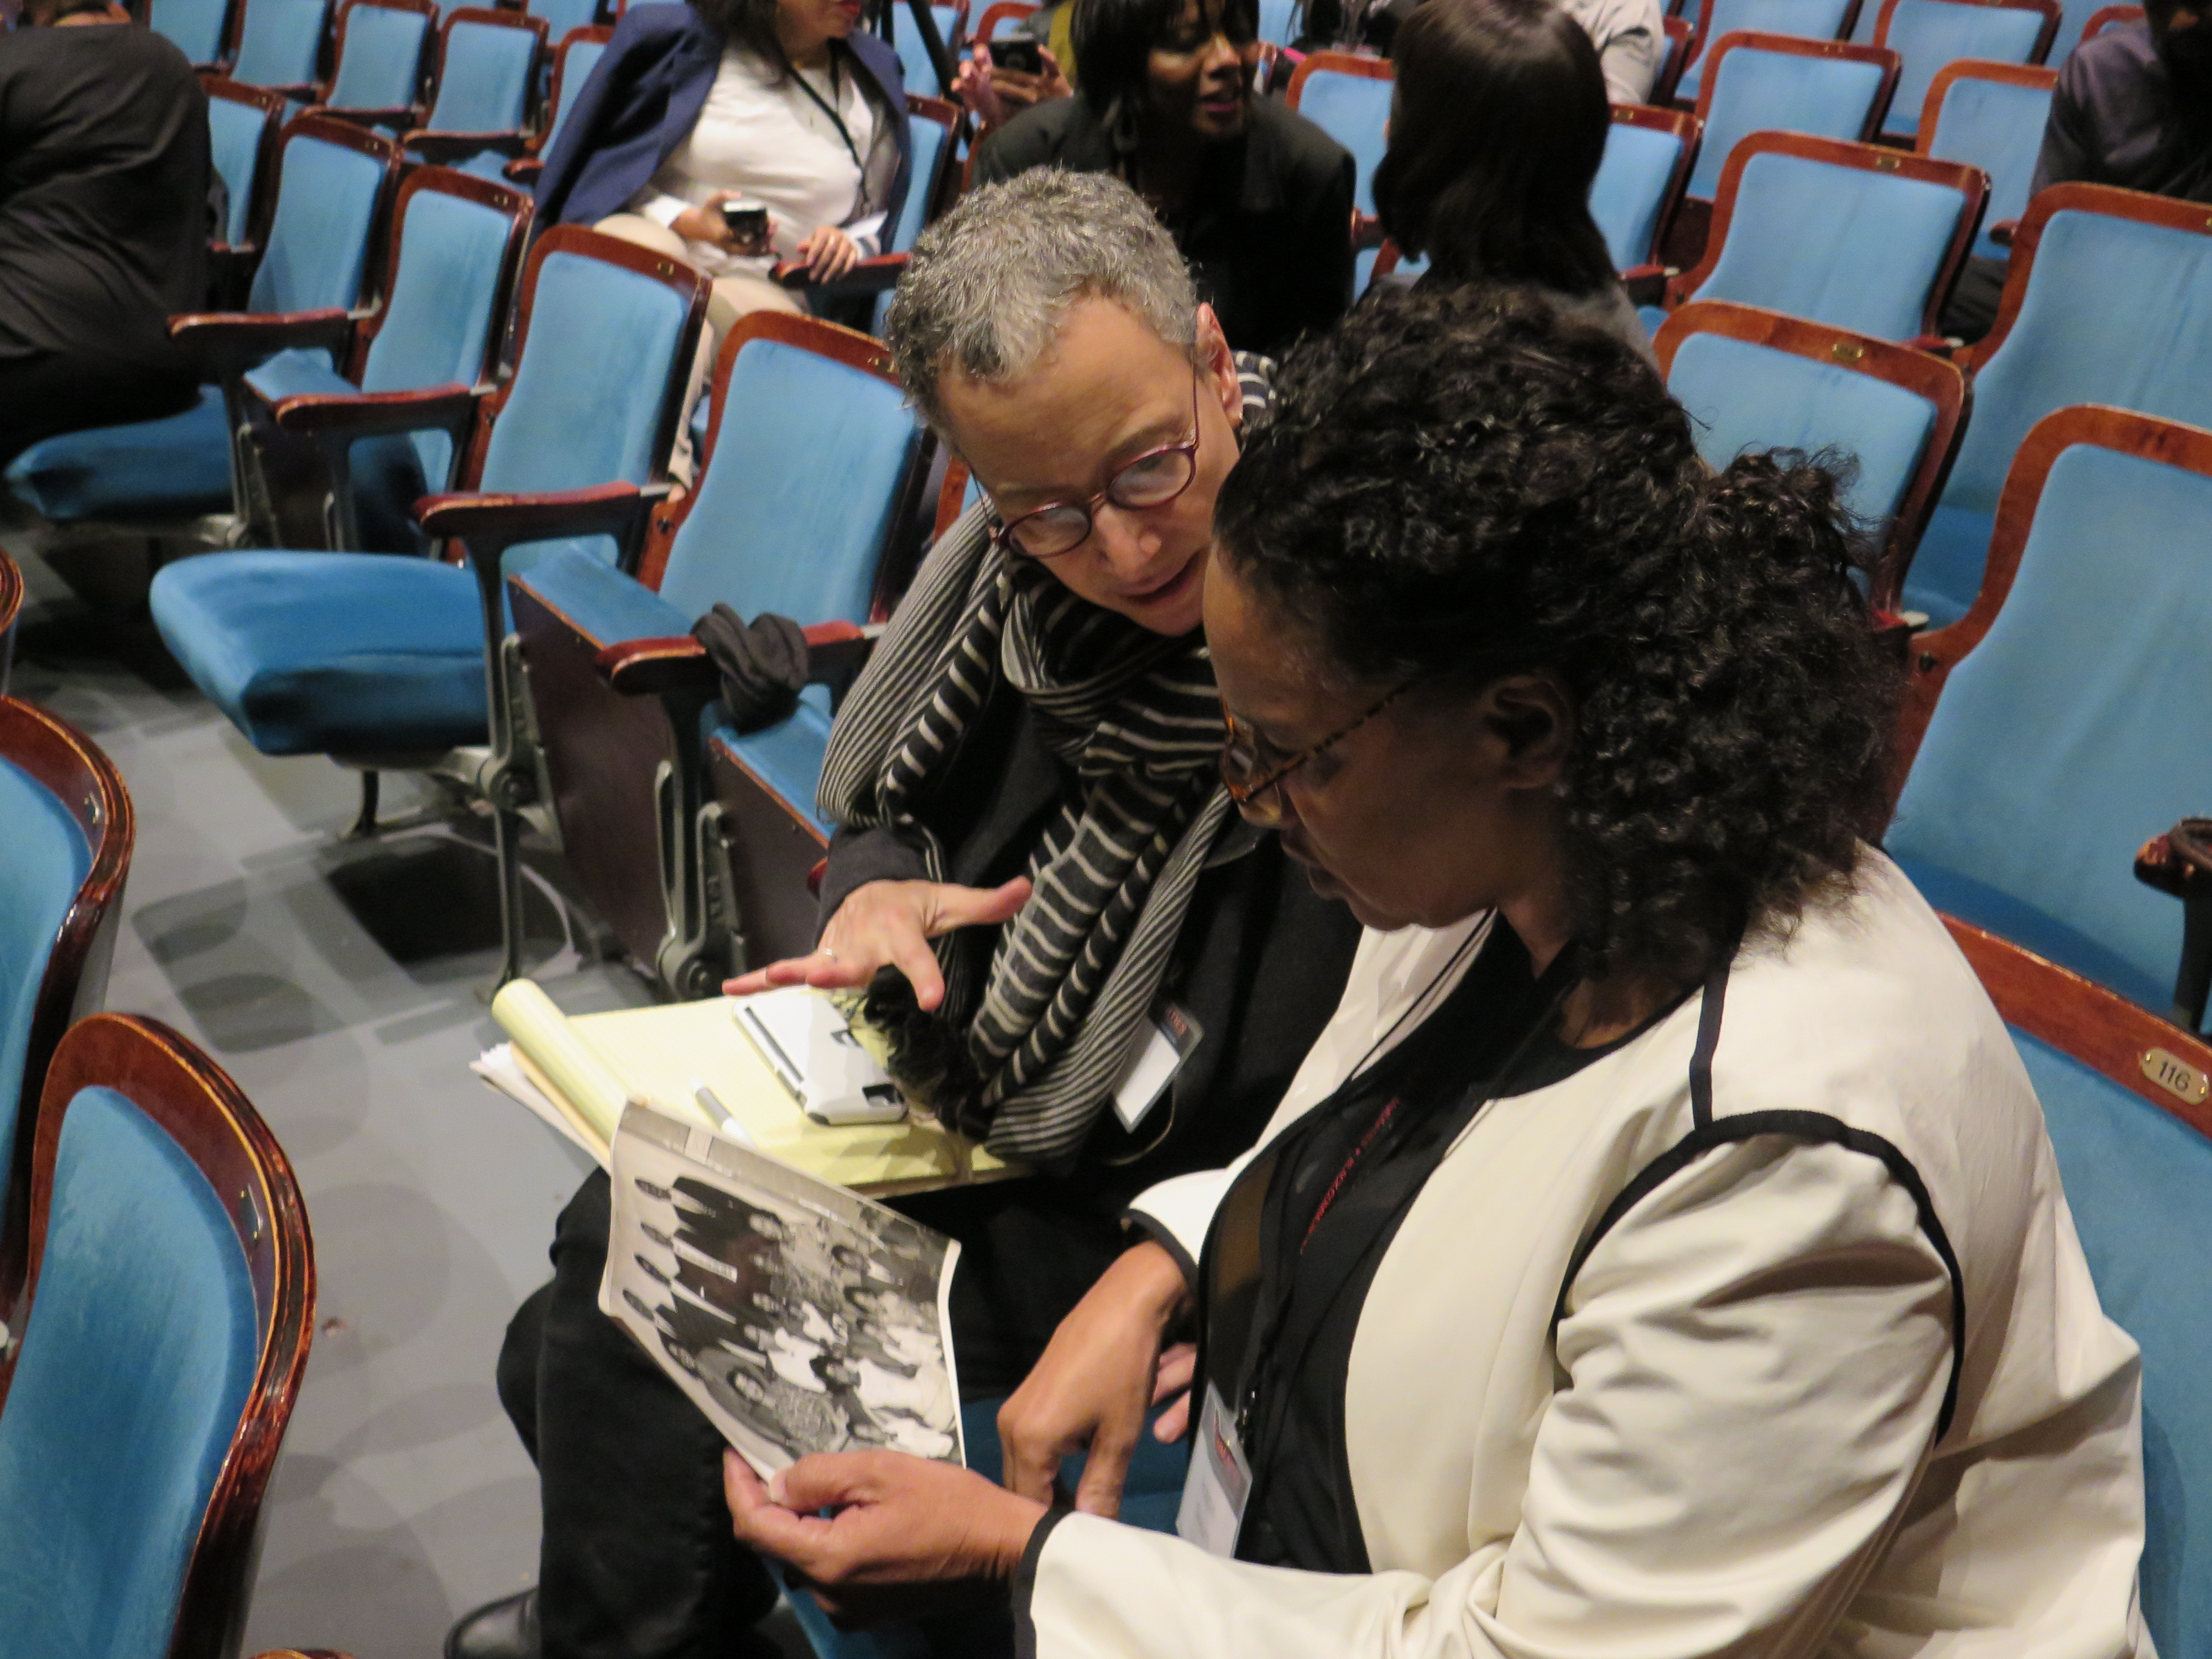 Two participants examine a photo at the Black Communities Conference